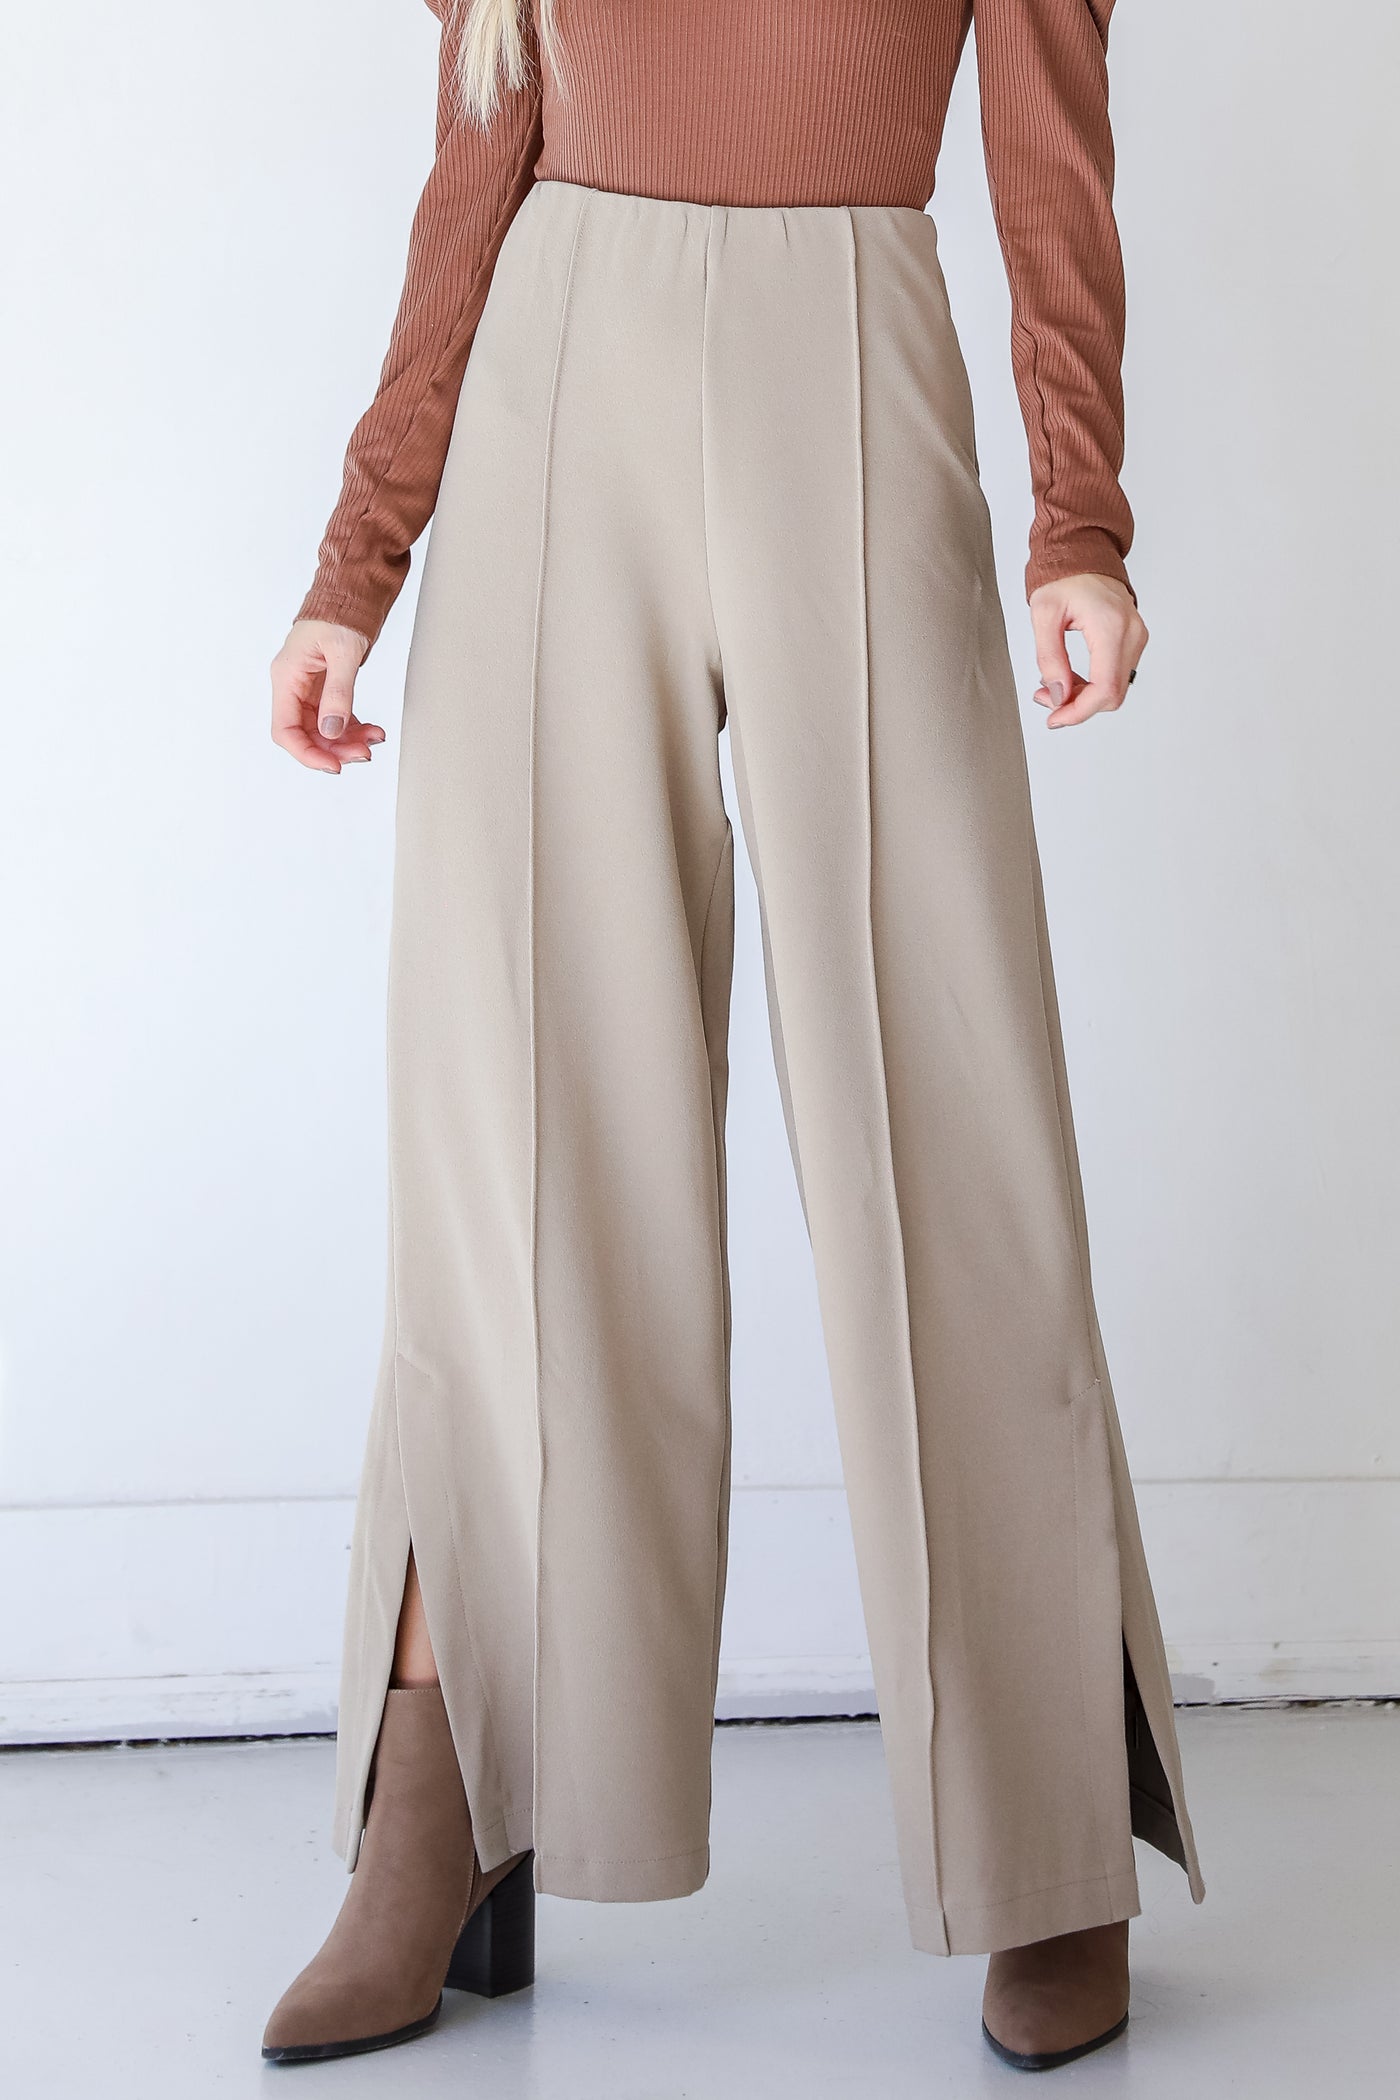 Pants in taupe front view